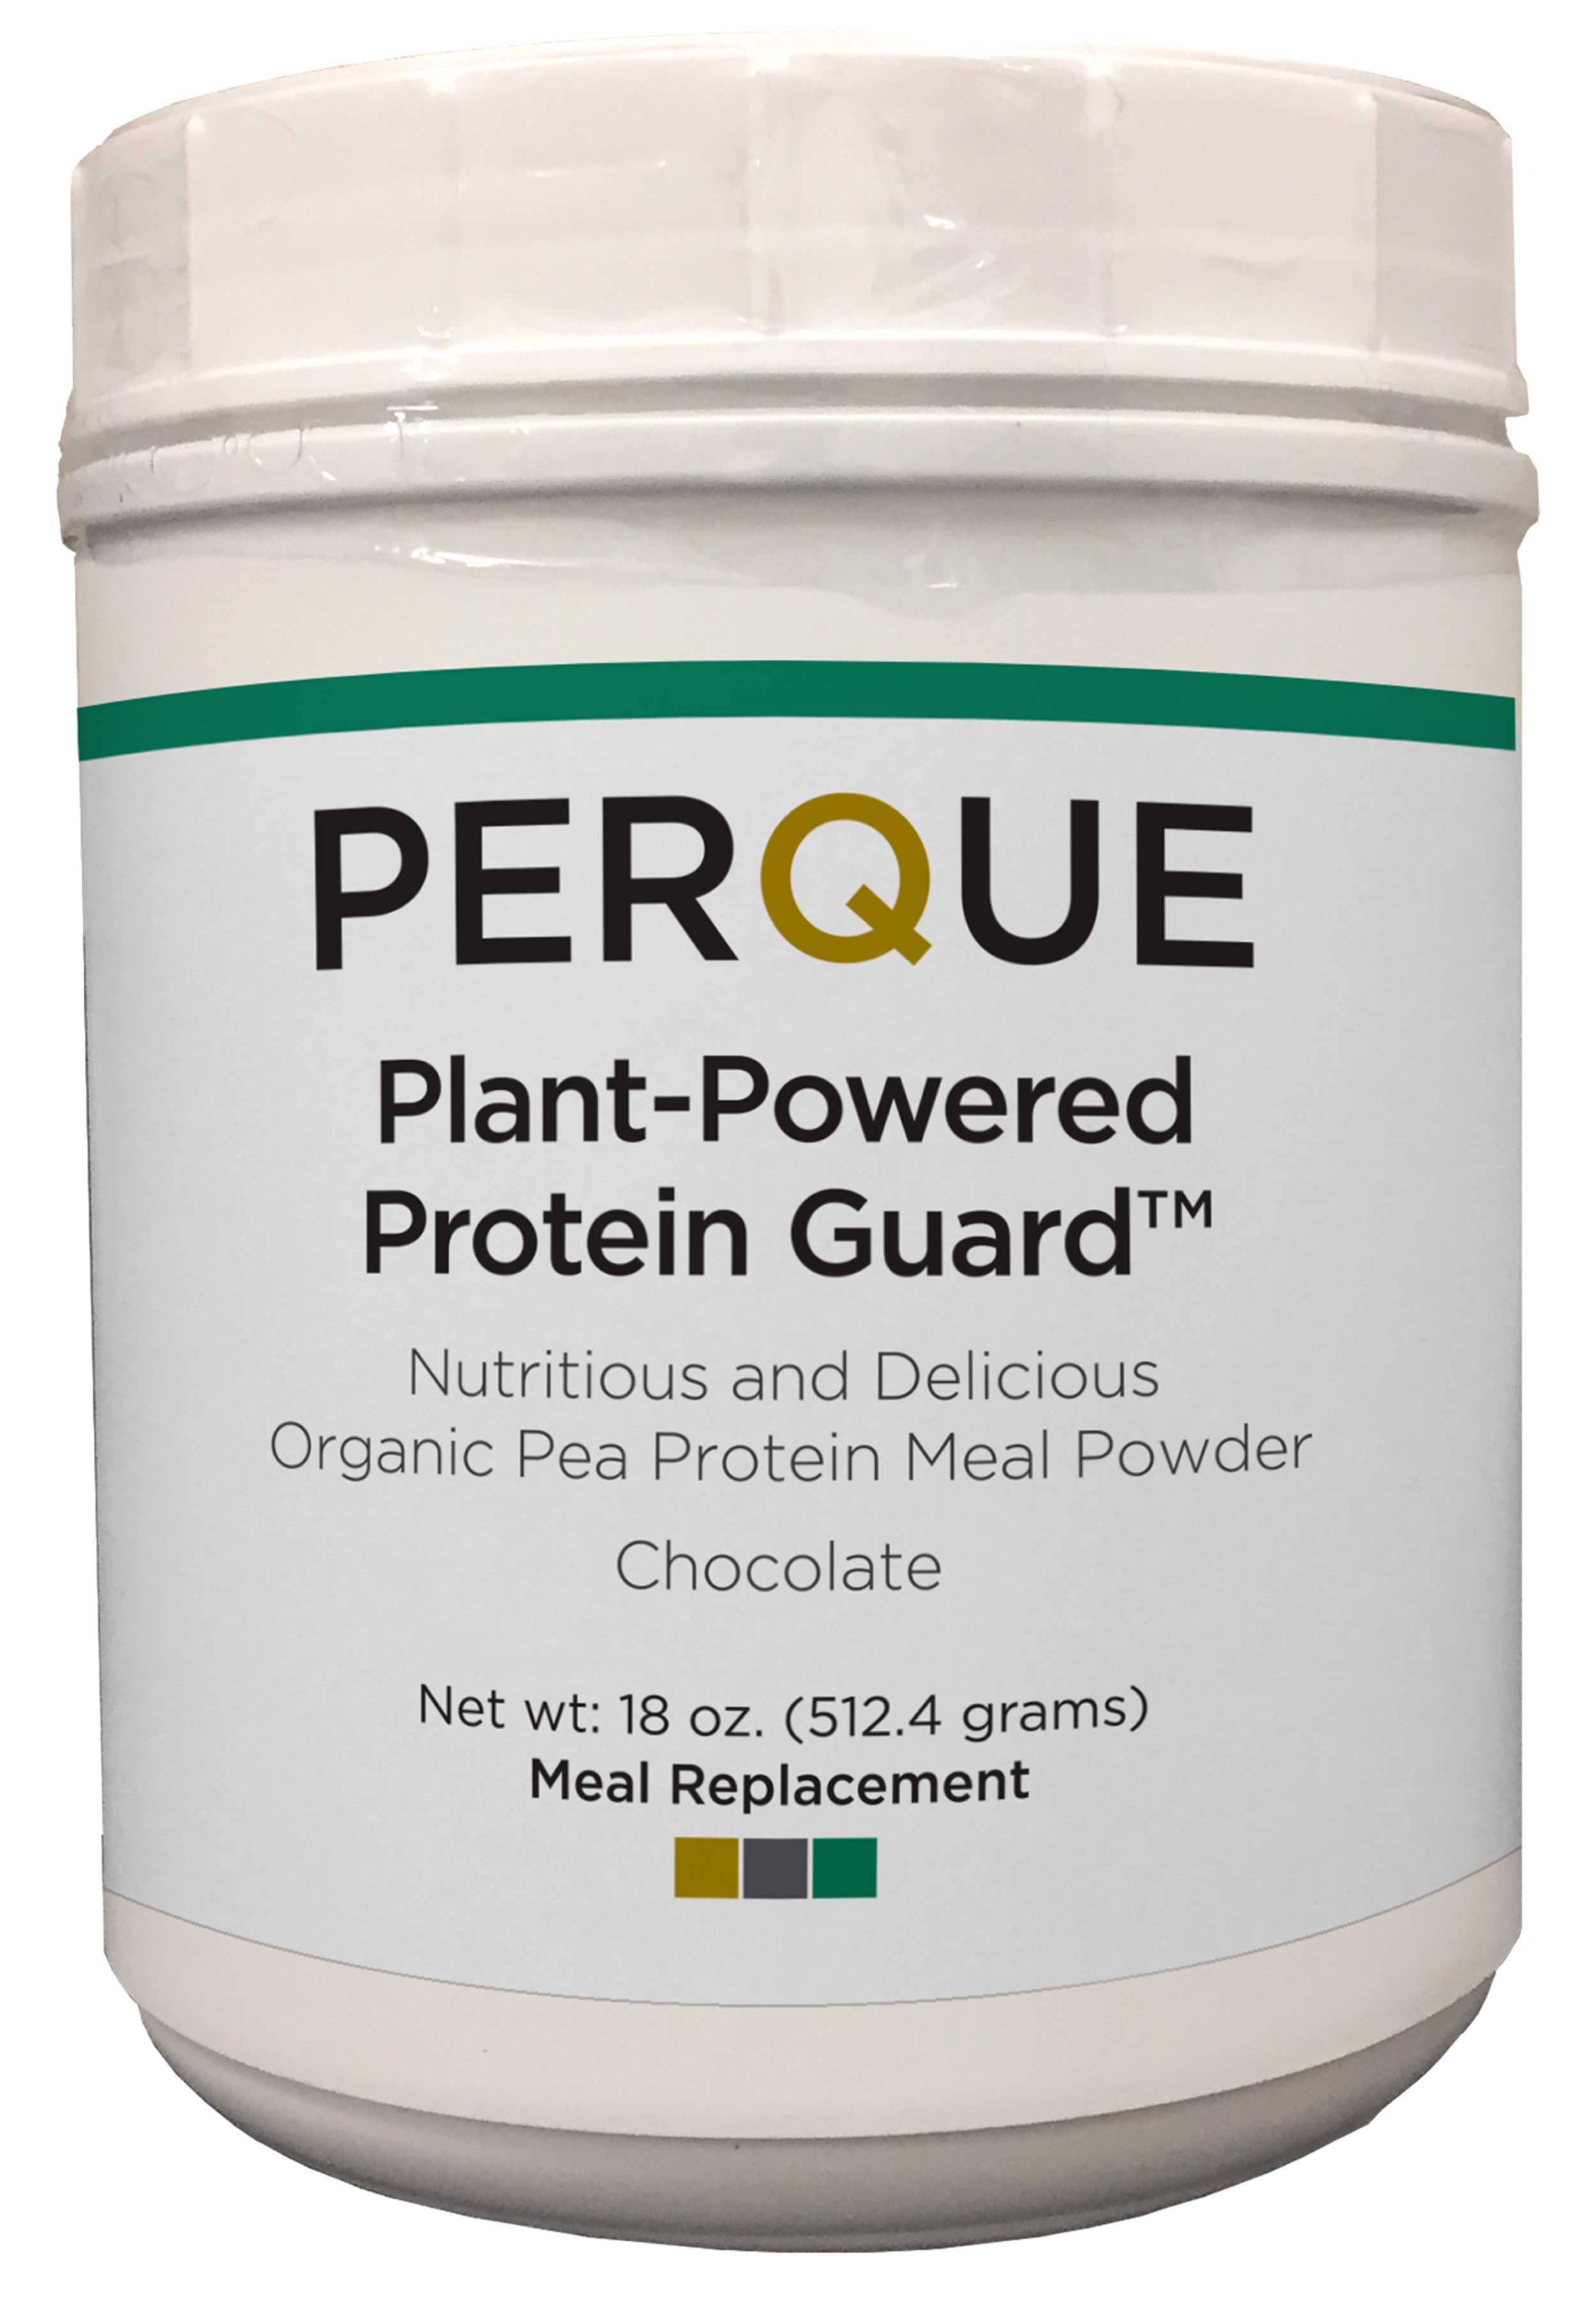 Perque Plant-Powered Protein Guard